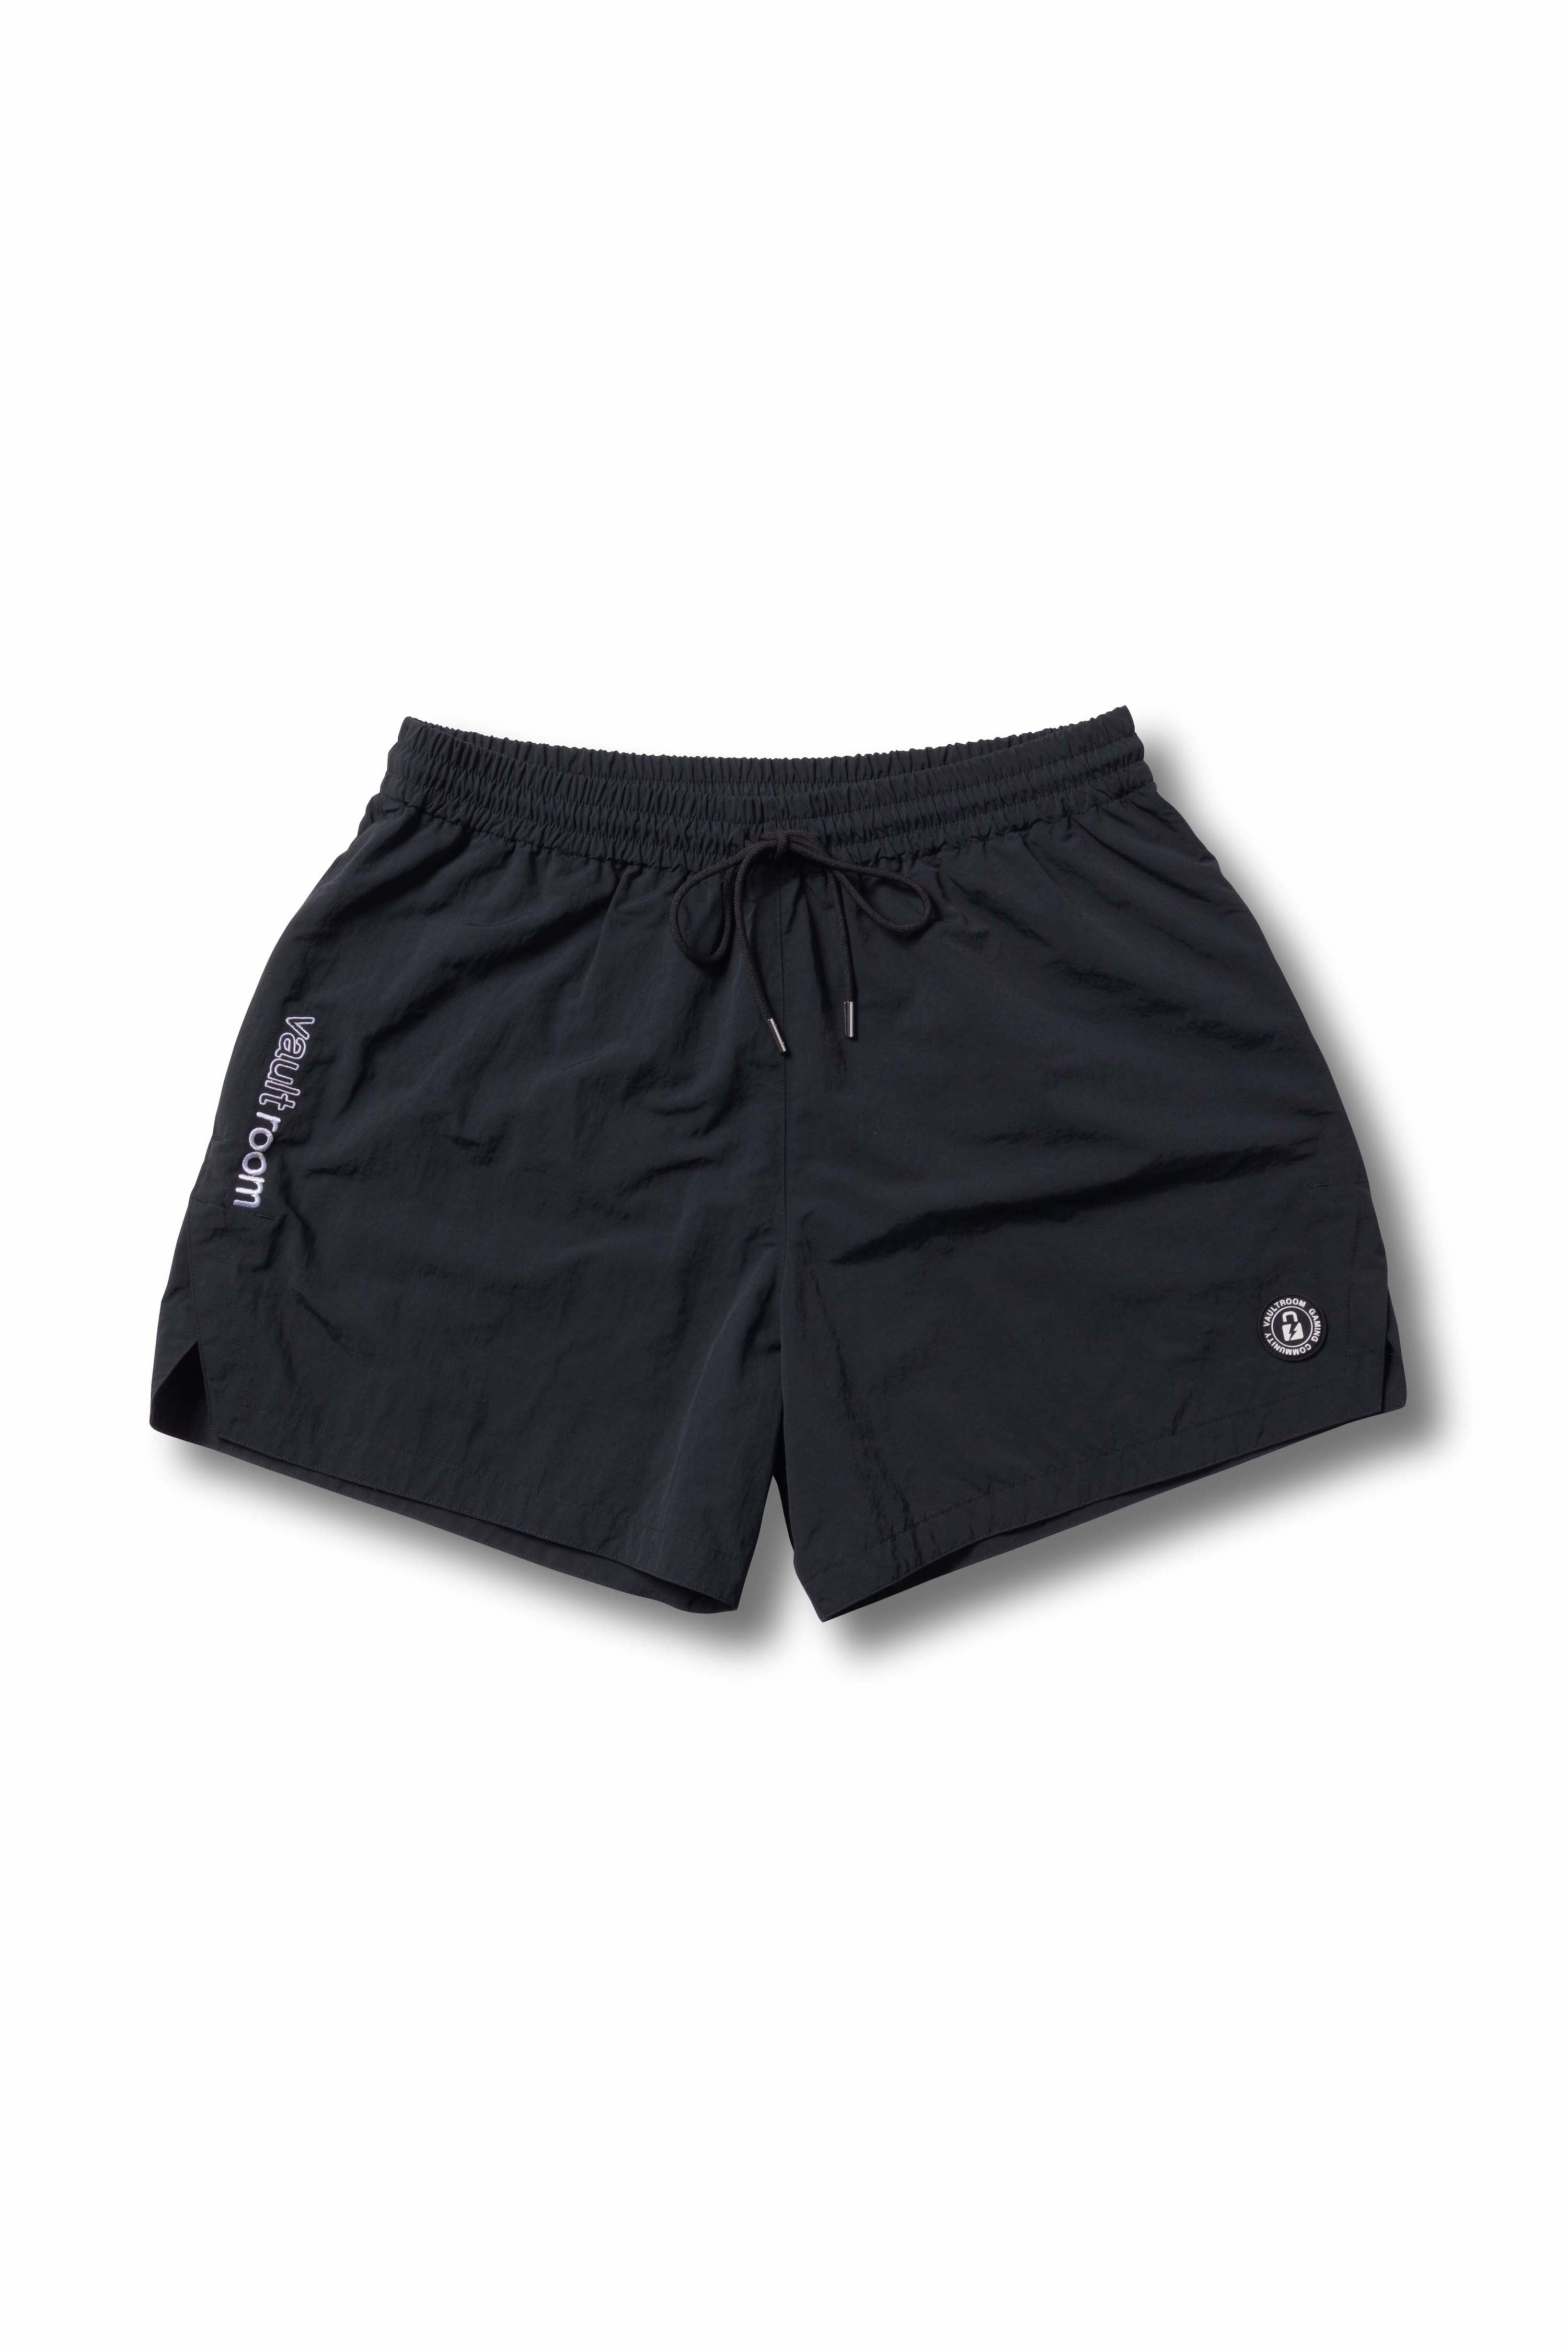 VAULT ROOM // VGC FRENCH TERRY SHORTS